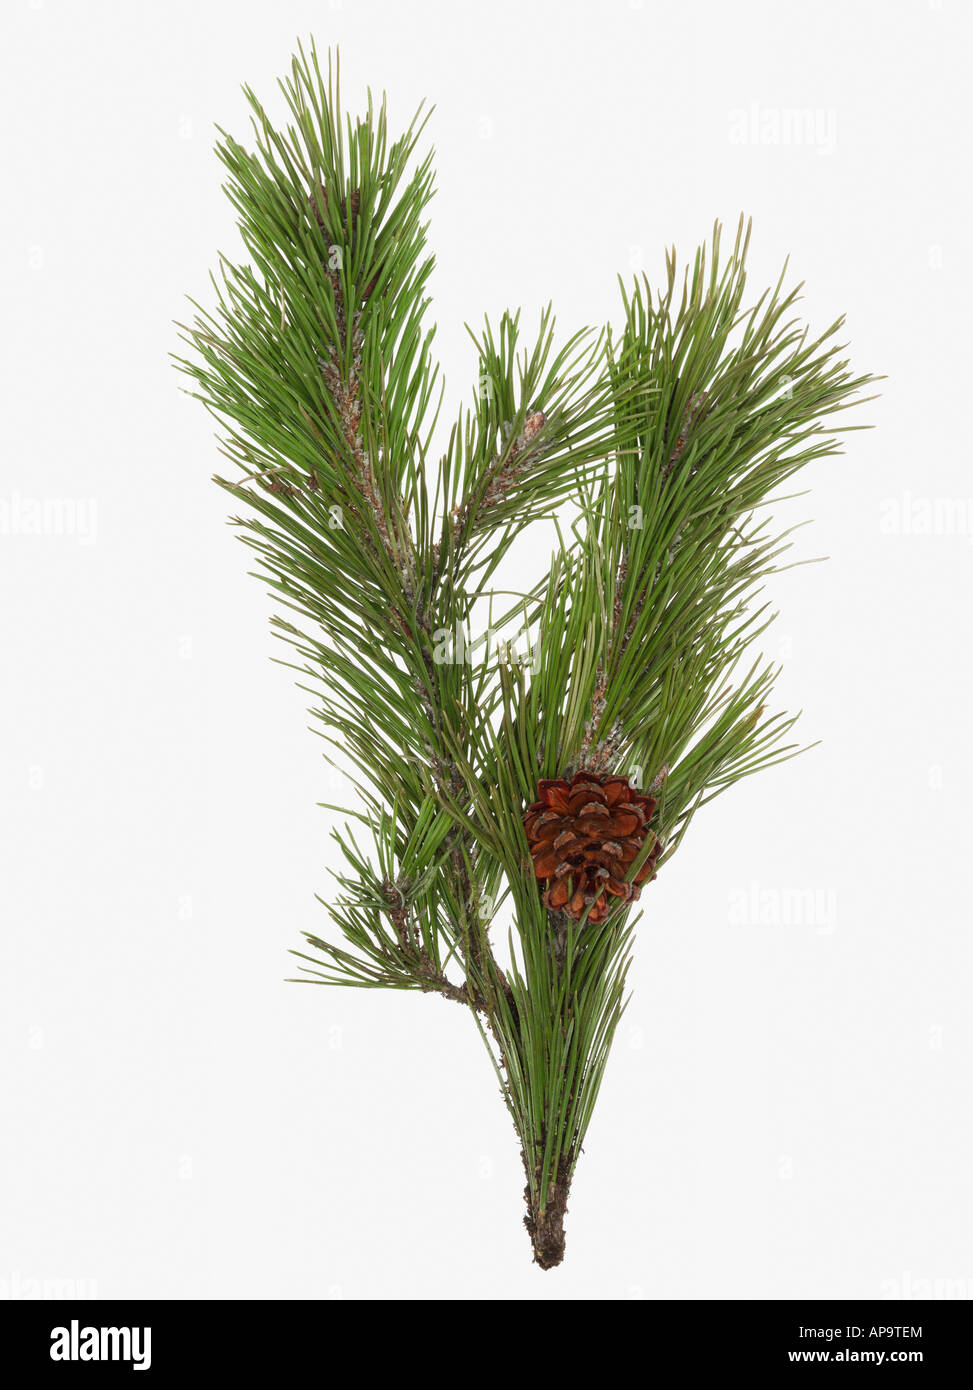 Pine cone and branch Stock Photo